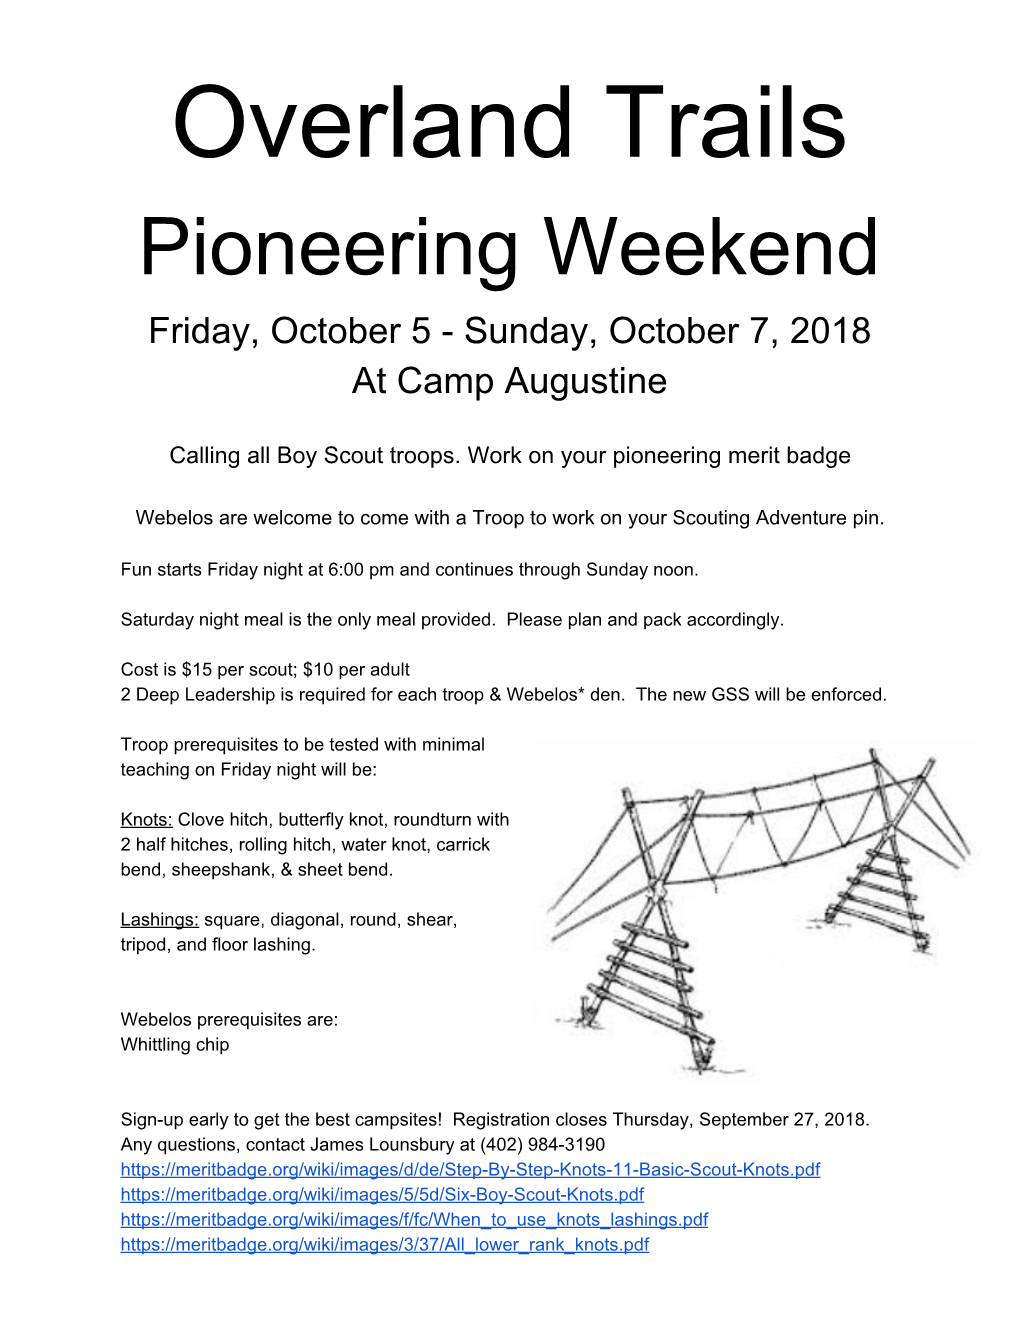 Overland Trails Pioneering Weekend Friday, October 5 - Sunday, October 7, 2018 at Camp Augustine